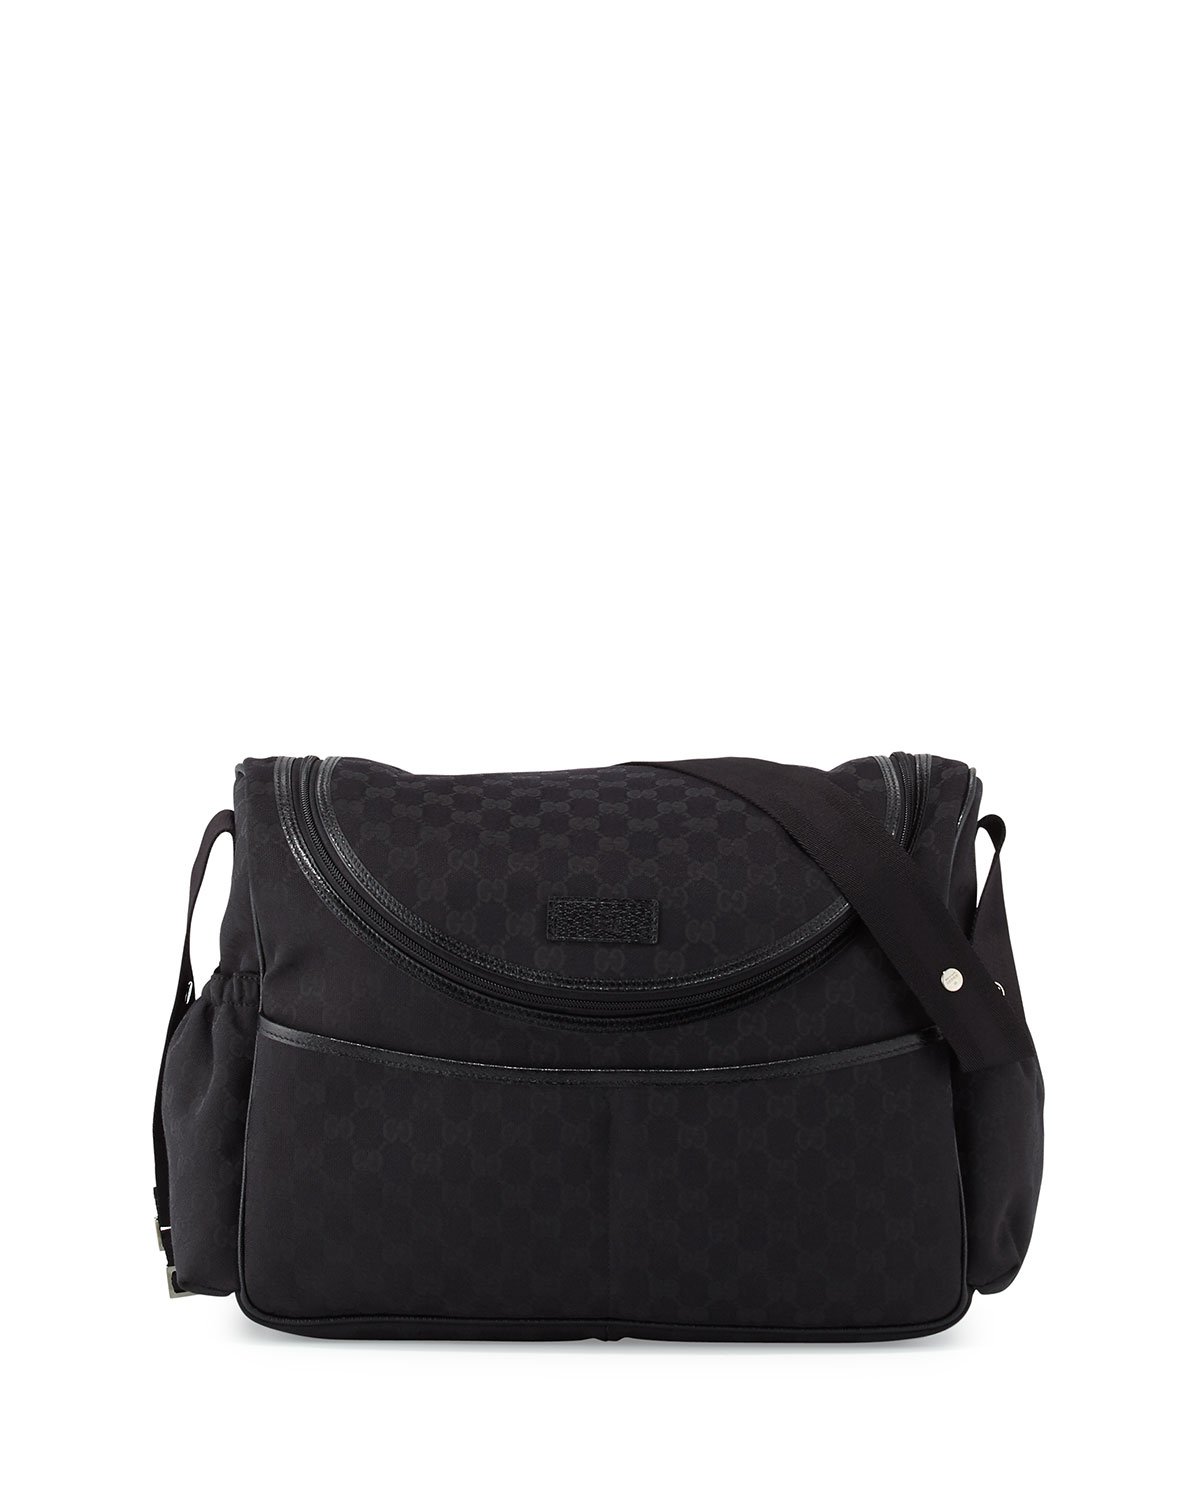 Gucci Travel Gg Canvas Diaper Bag W/ Changing Pad in Black for Men - Lyst